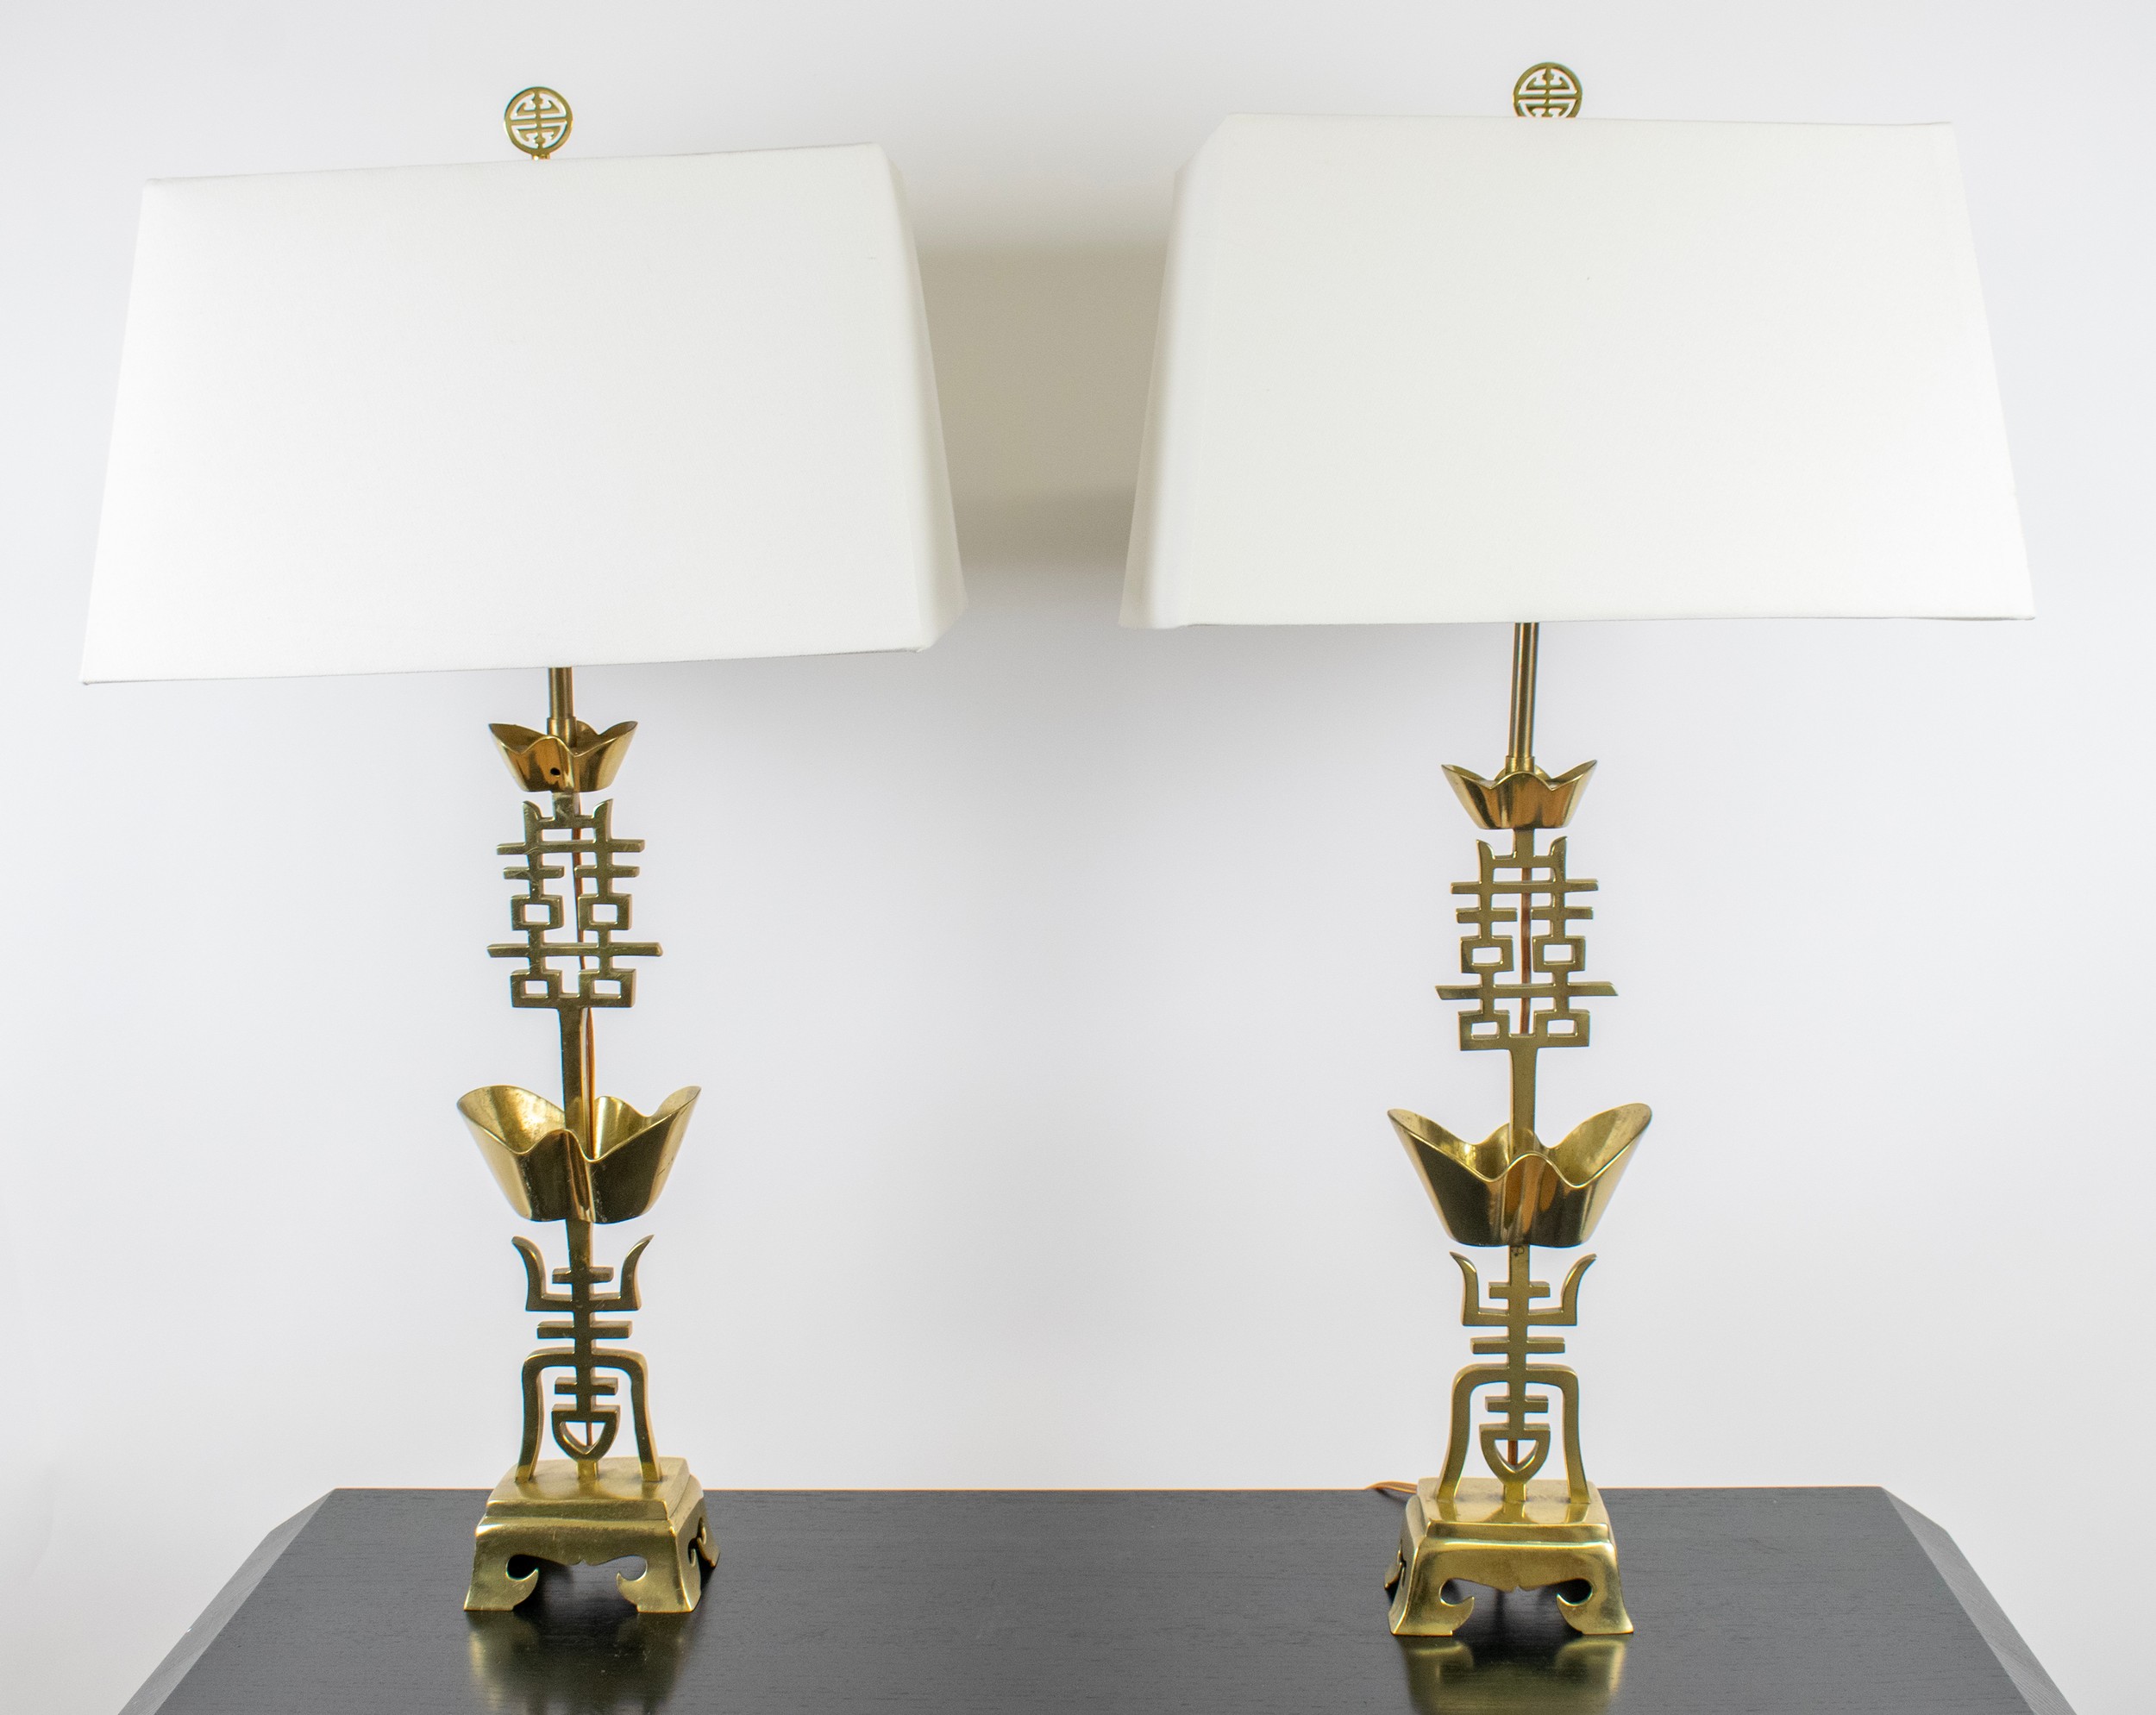 TABLE LAMPS, 81cm H x 41cm x 31cm, a pair, Asian brass including white shades. (2)